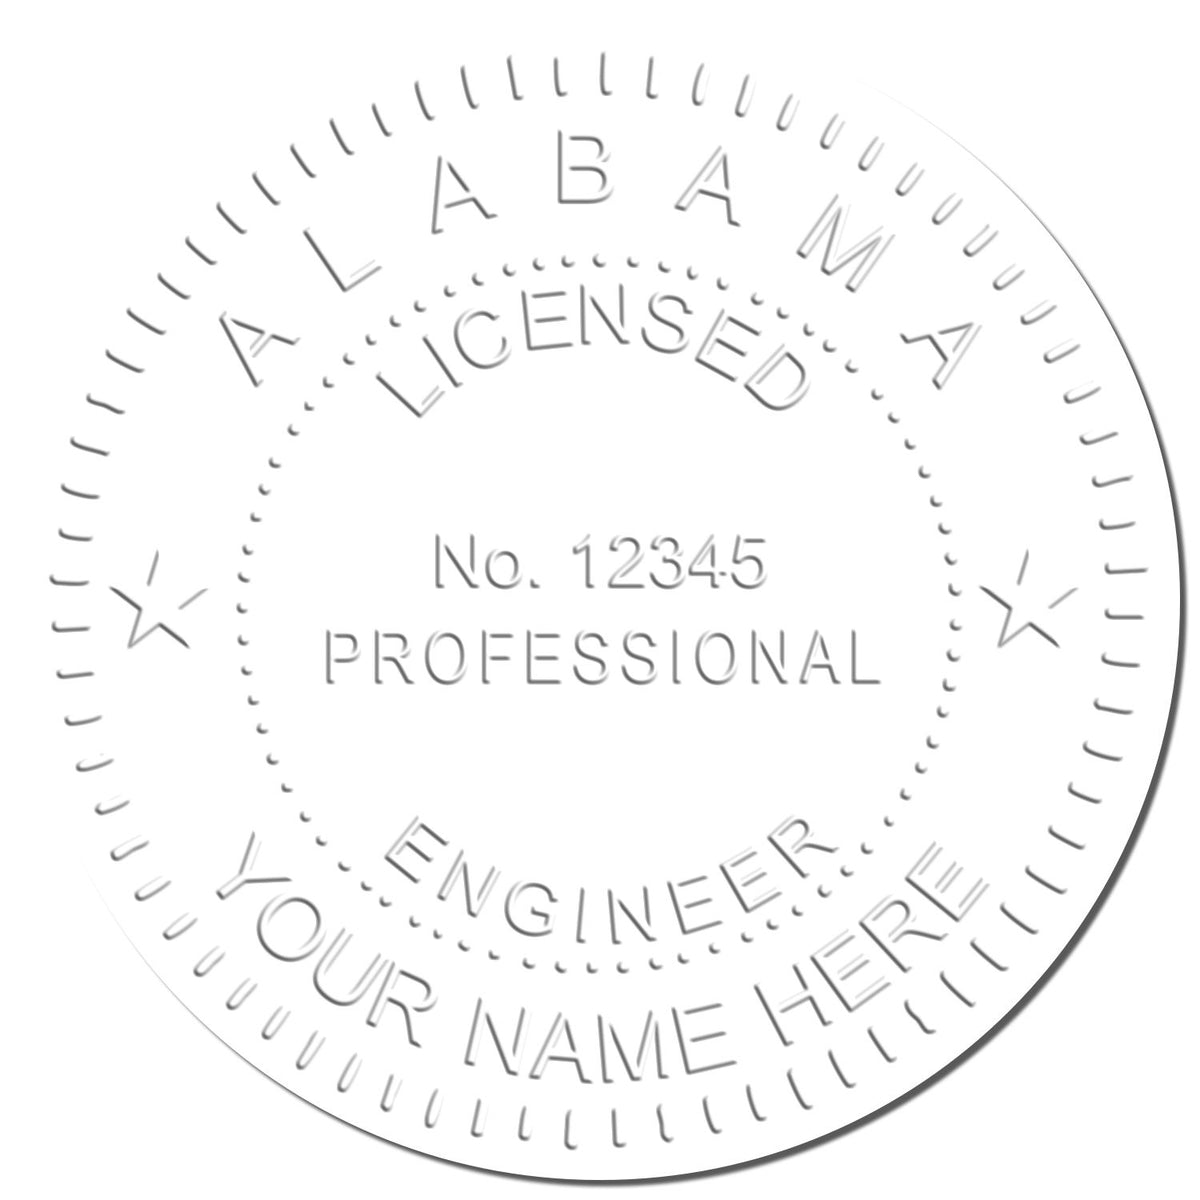 This paper is stamped with a sample imprint of the Heavy Duty Cast Iron Alabama Engineer Seal Embosser, signifying its quality and reliability.